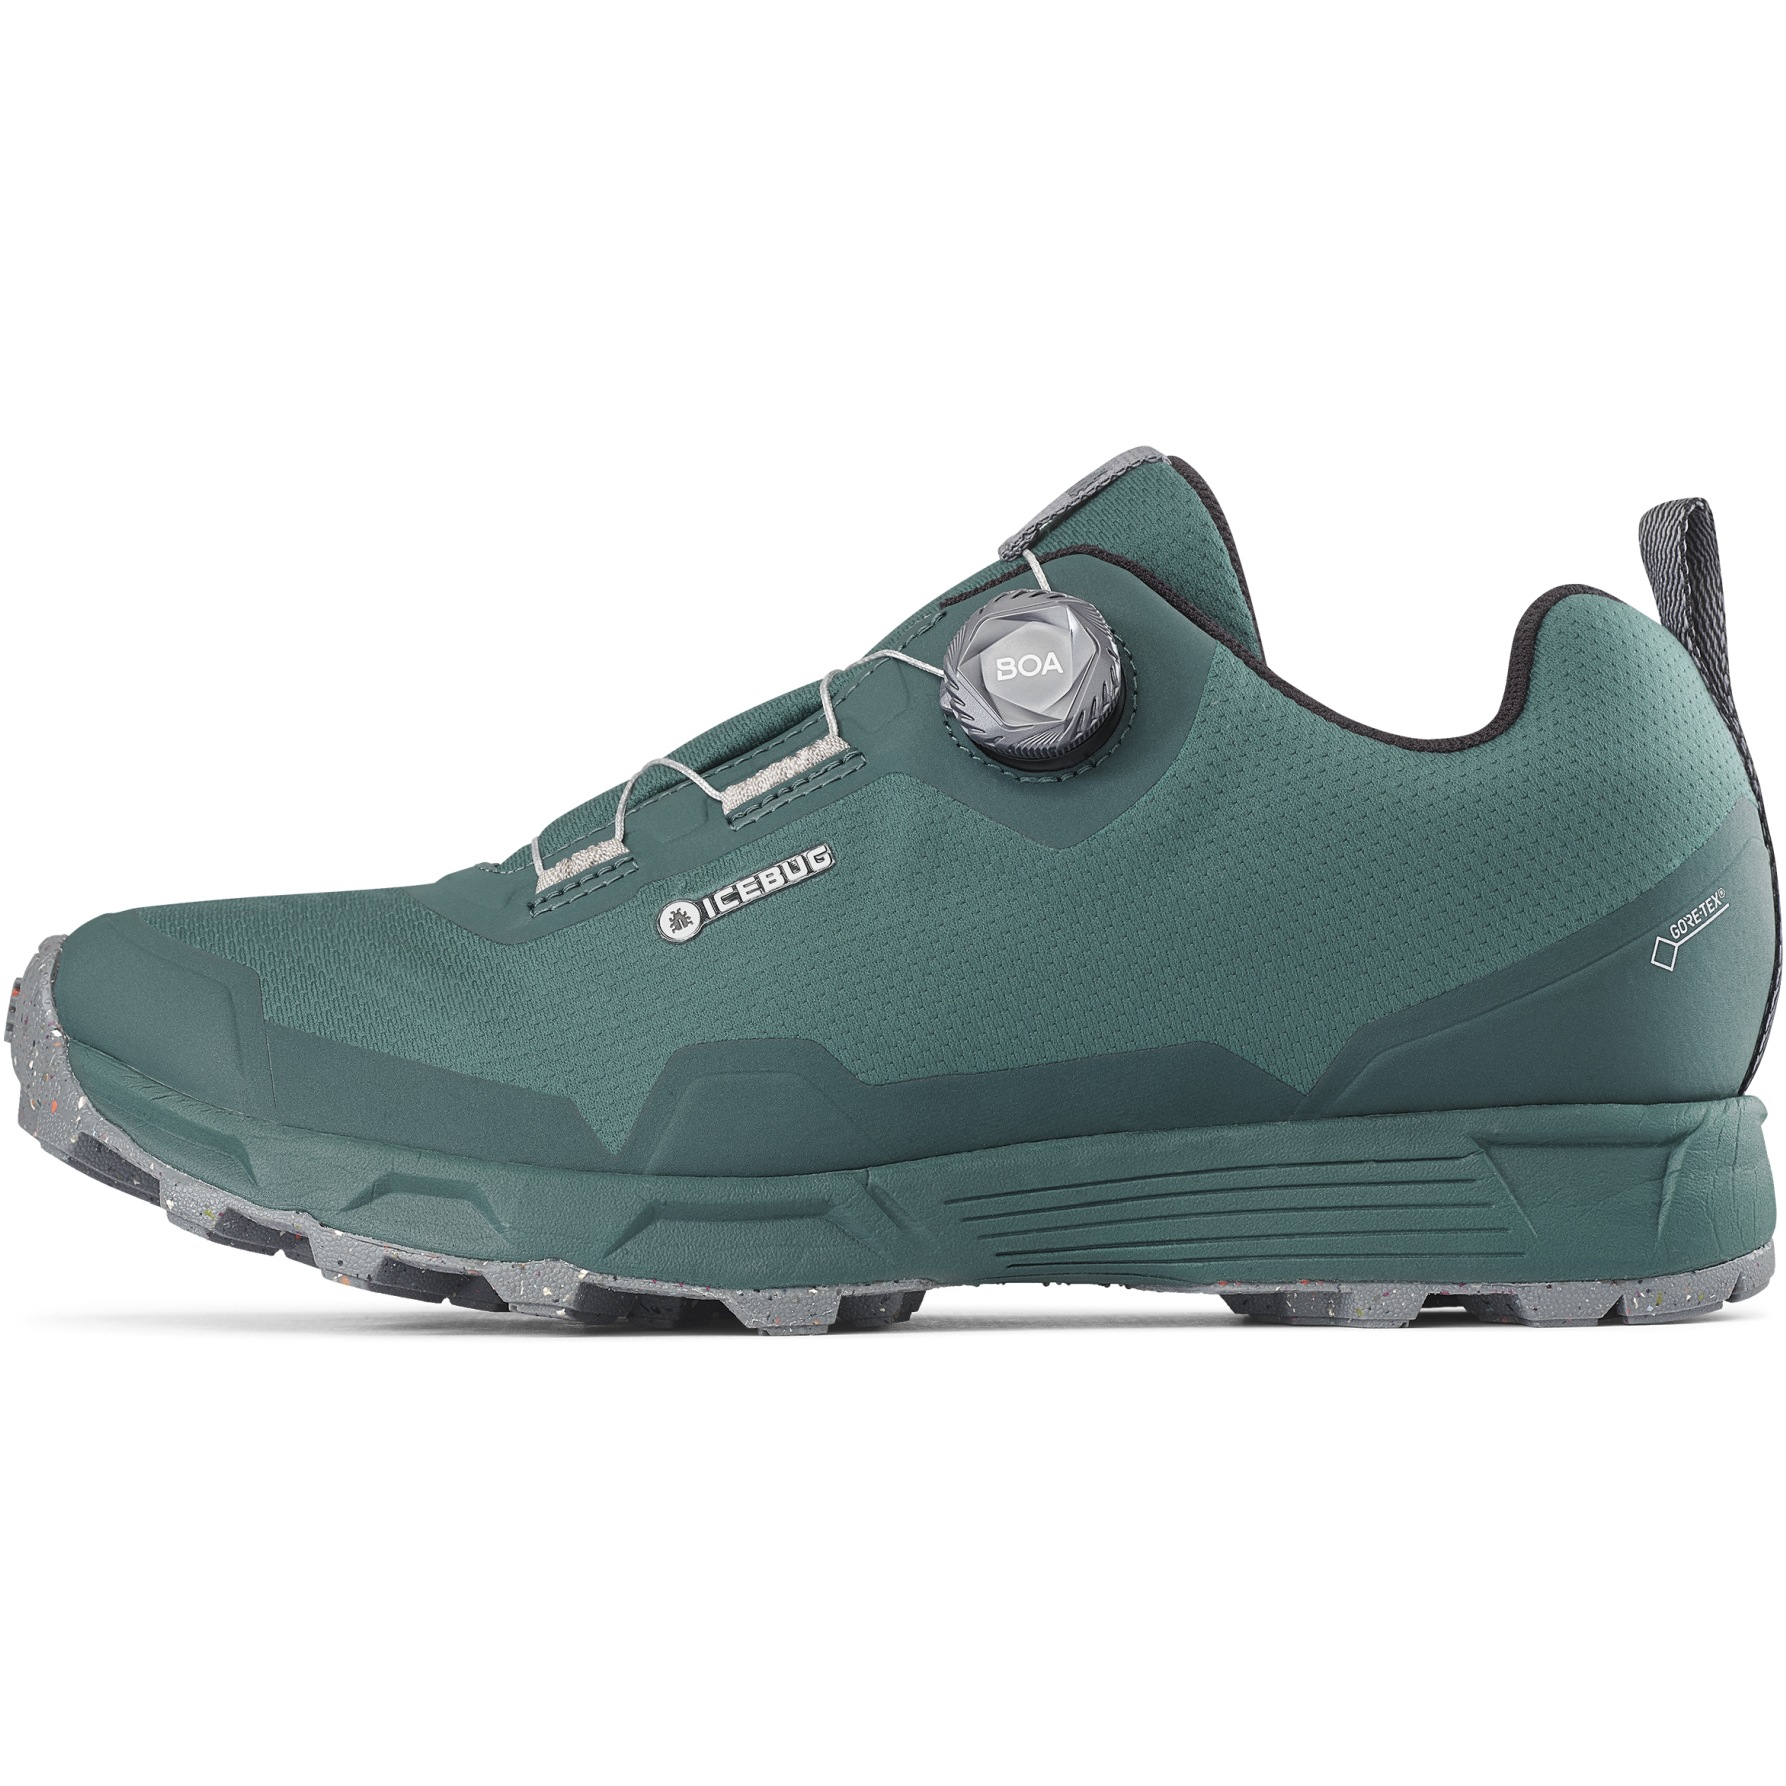 Picture of Icebug Rover M RB9X GTX Shoes - teal/stone